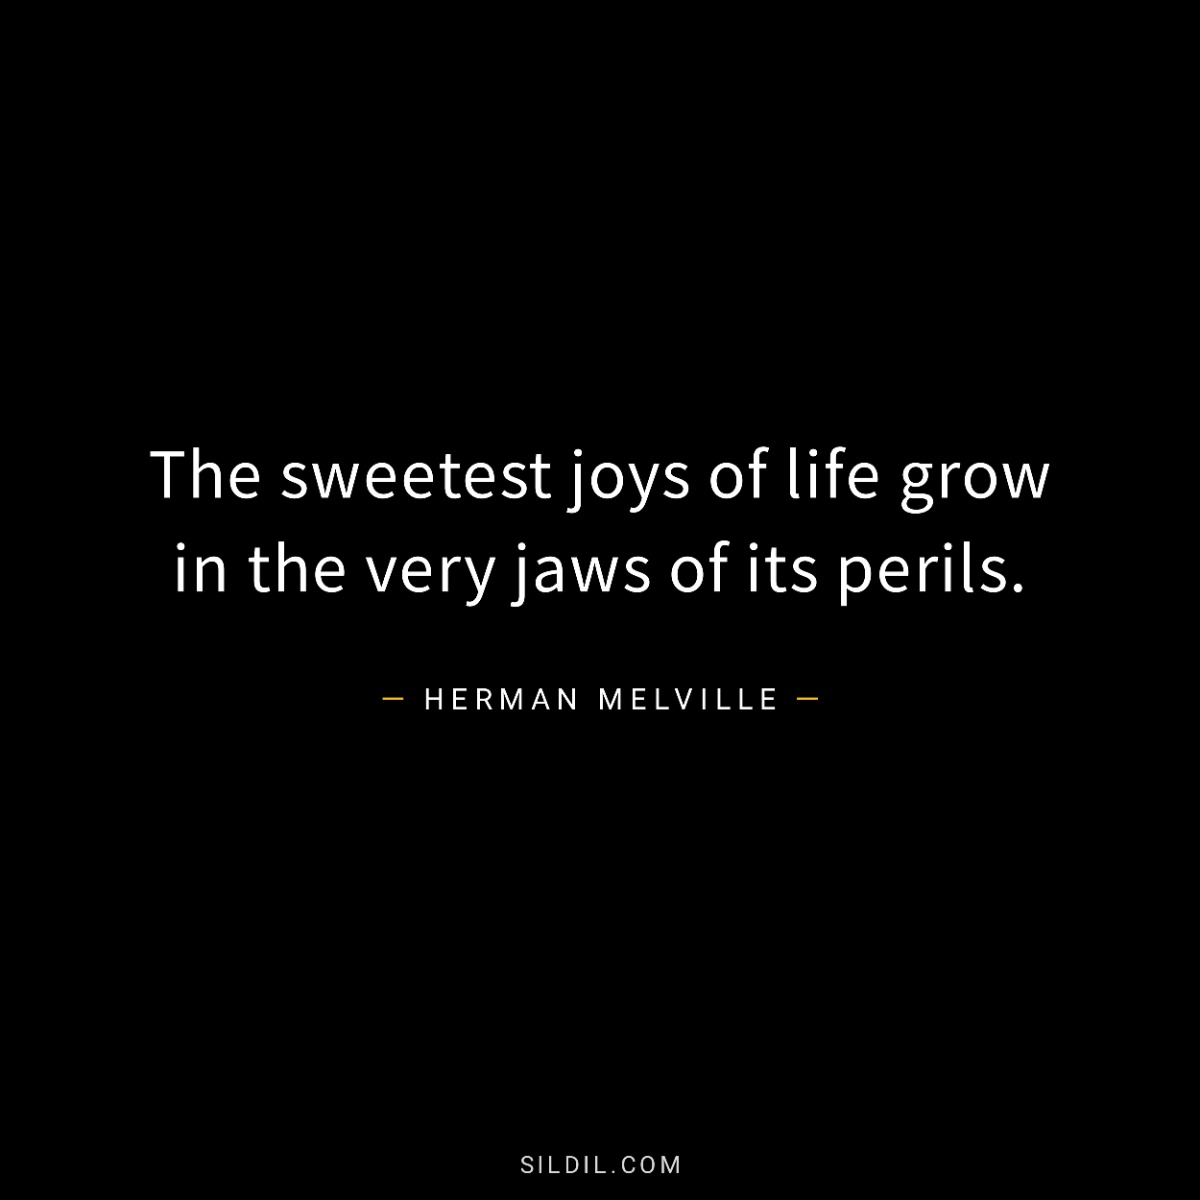 The sweetest joys of life grow in the very jaws of its perils.